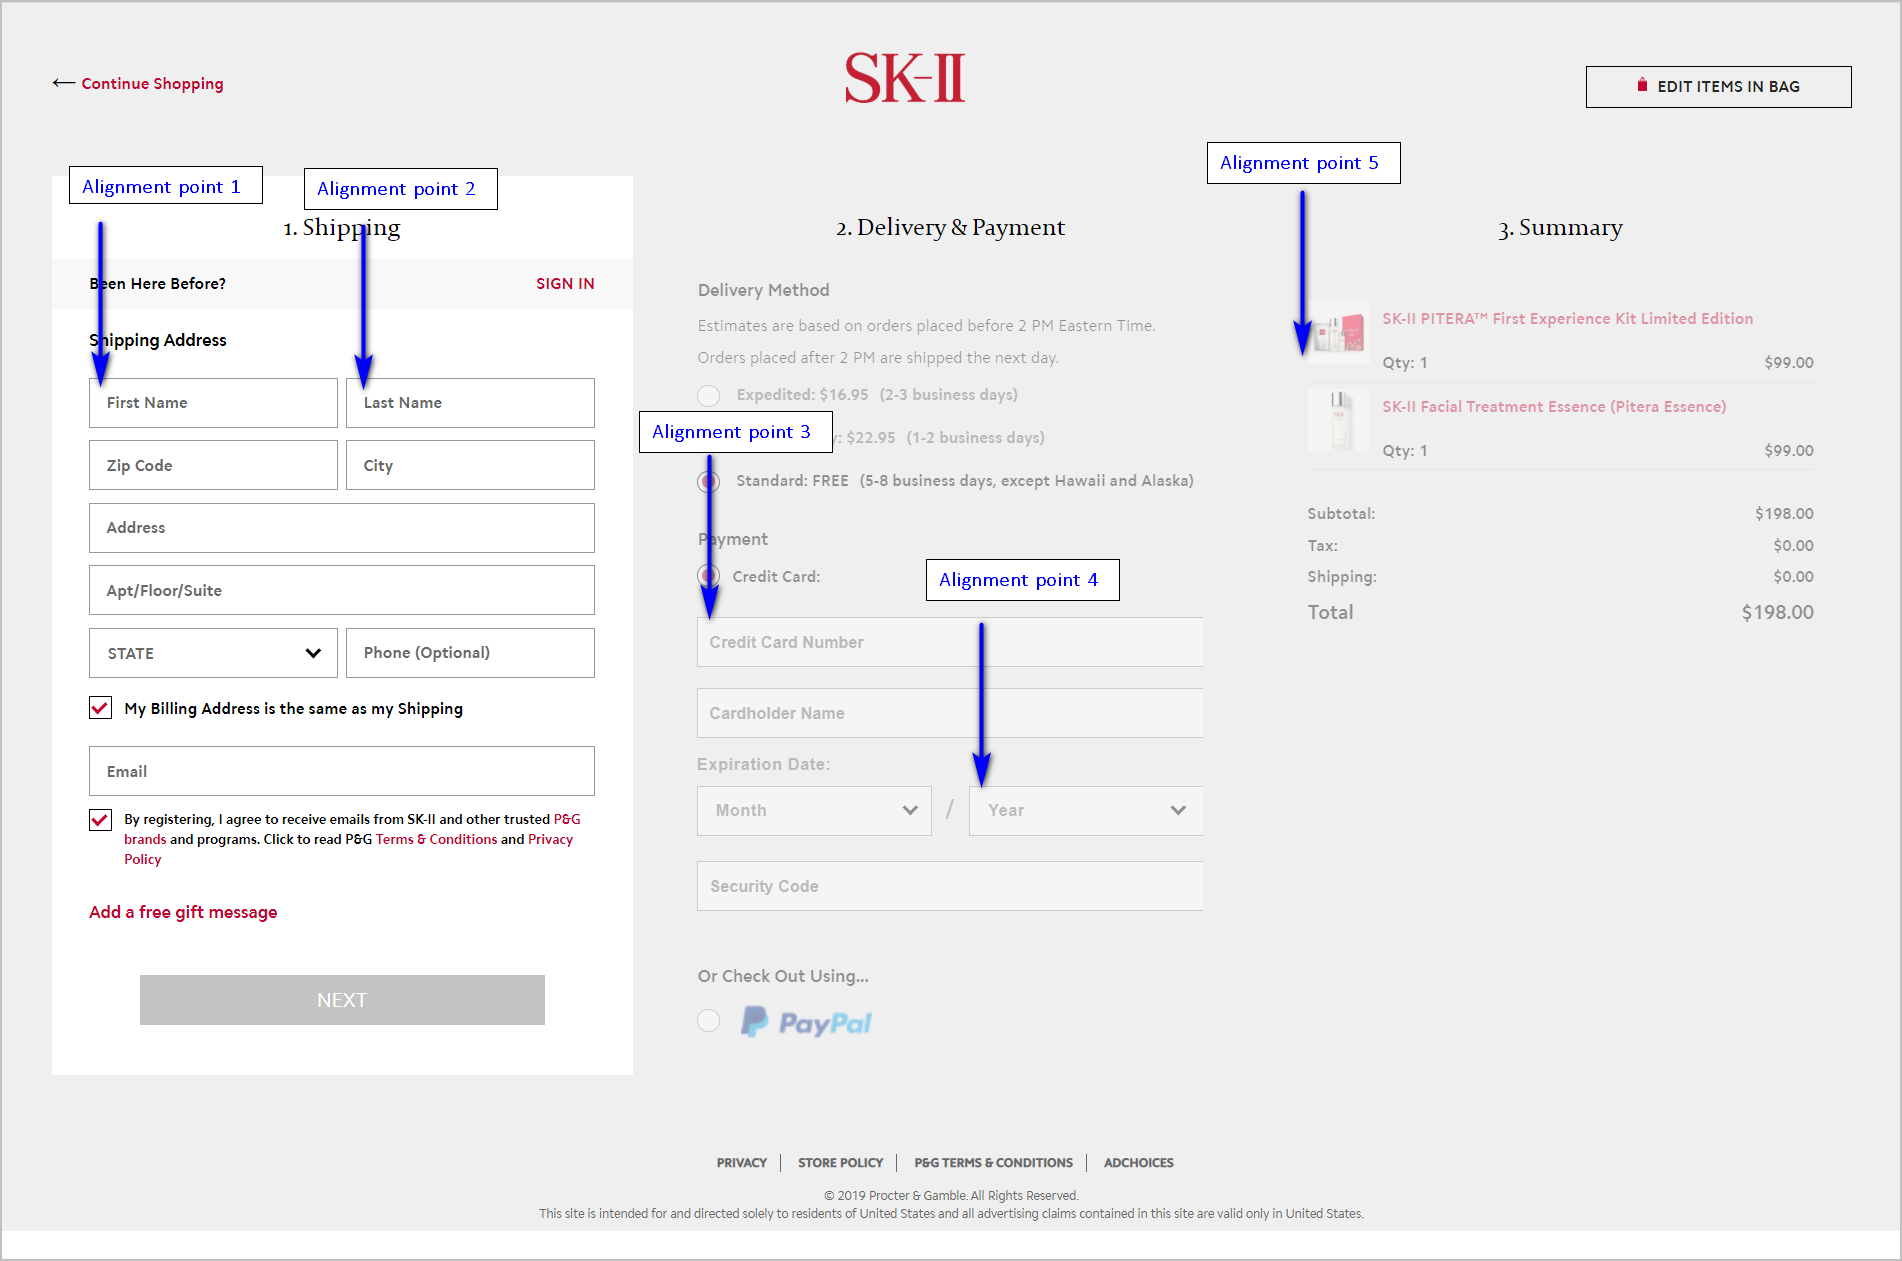 reduce cognitive load: alignment points example - SK-II.com's checkout page divided into the shipping, delivery & payment, and summary sections. the shipping section has 2 alignment points, the delivery & payment section has 2 alignment points, and the summary section has 1 alignment point. only the shipping section is active 